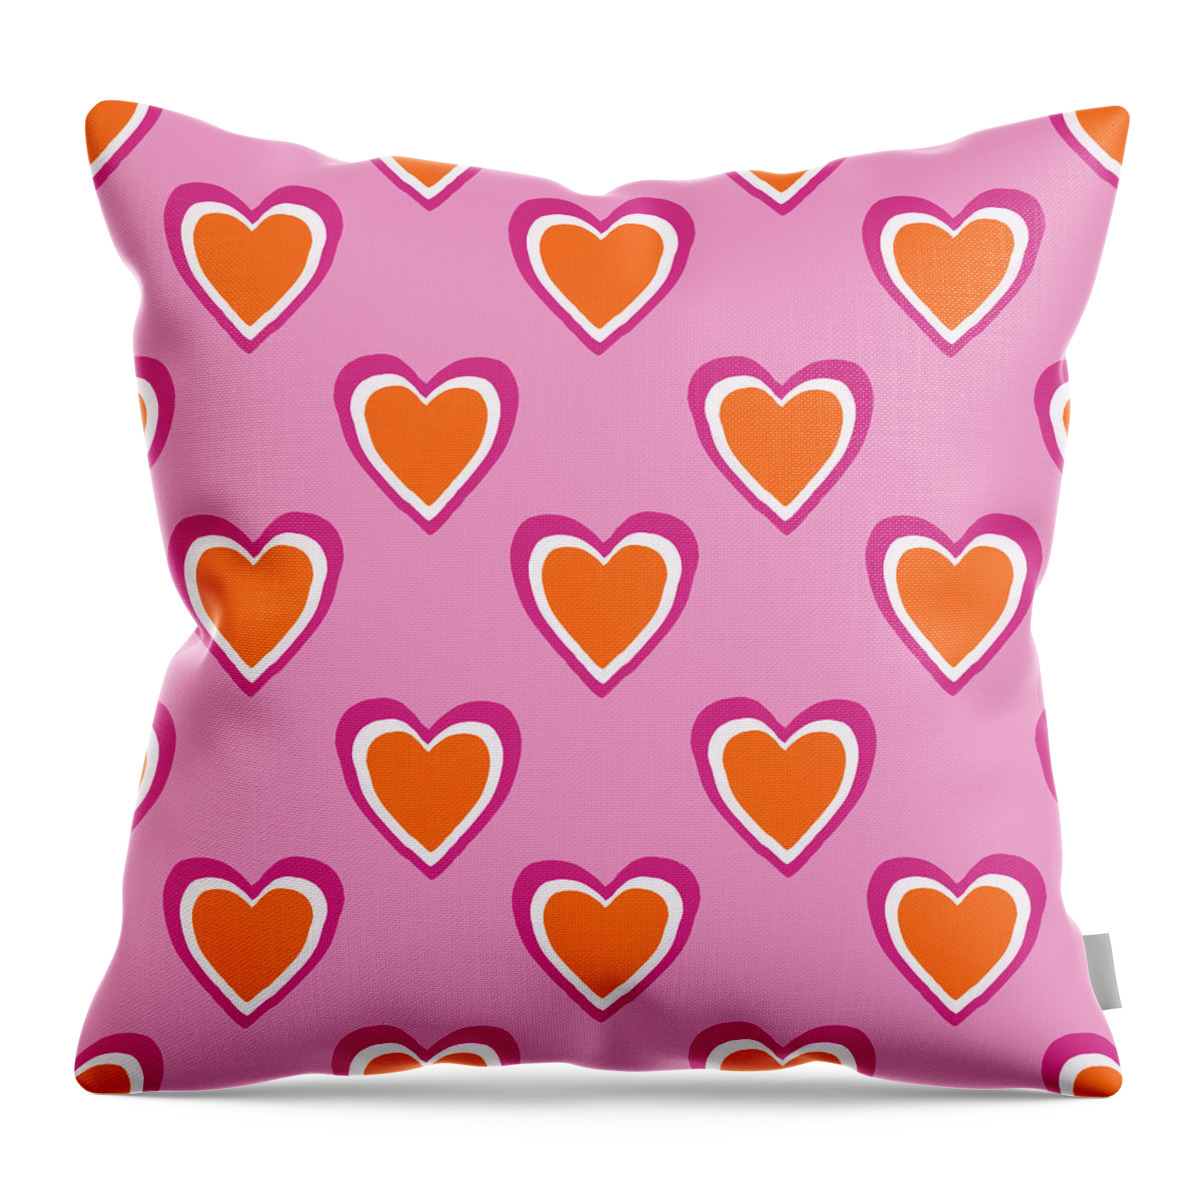 Hearts Throw Pillow featuring the mixed media Pink And Orange Hearts- Art by Linda Woods by Linda Woods